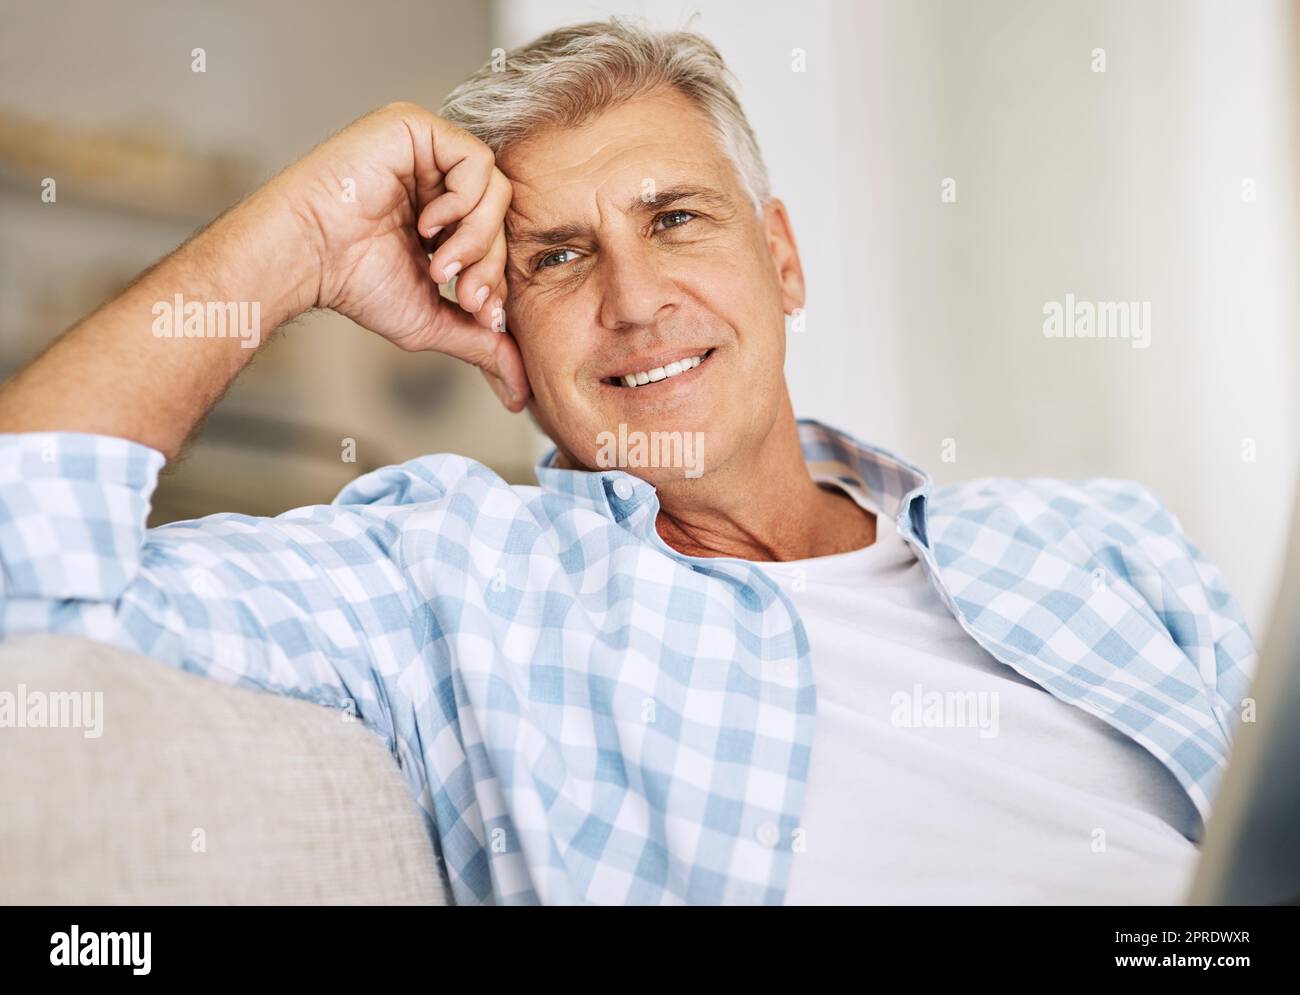 Handsome mature man relaxing on a sofa, casual, carefree and happy at home. Senior male enjoying the pleasure of retired life, satisfied and stressless. Older guy thinking, smiling and daydreaming Stock Photo